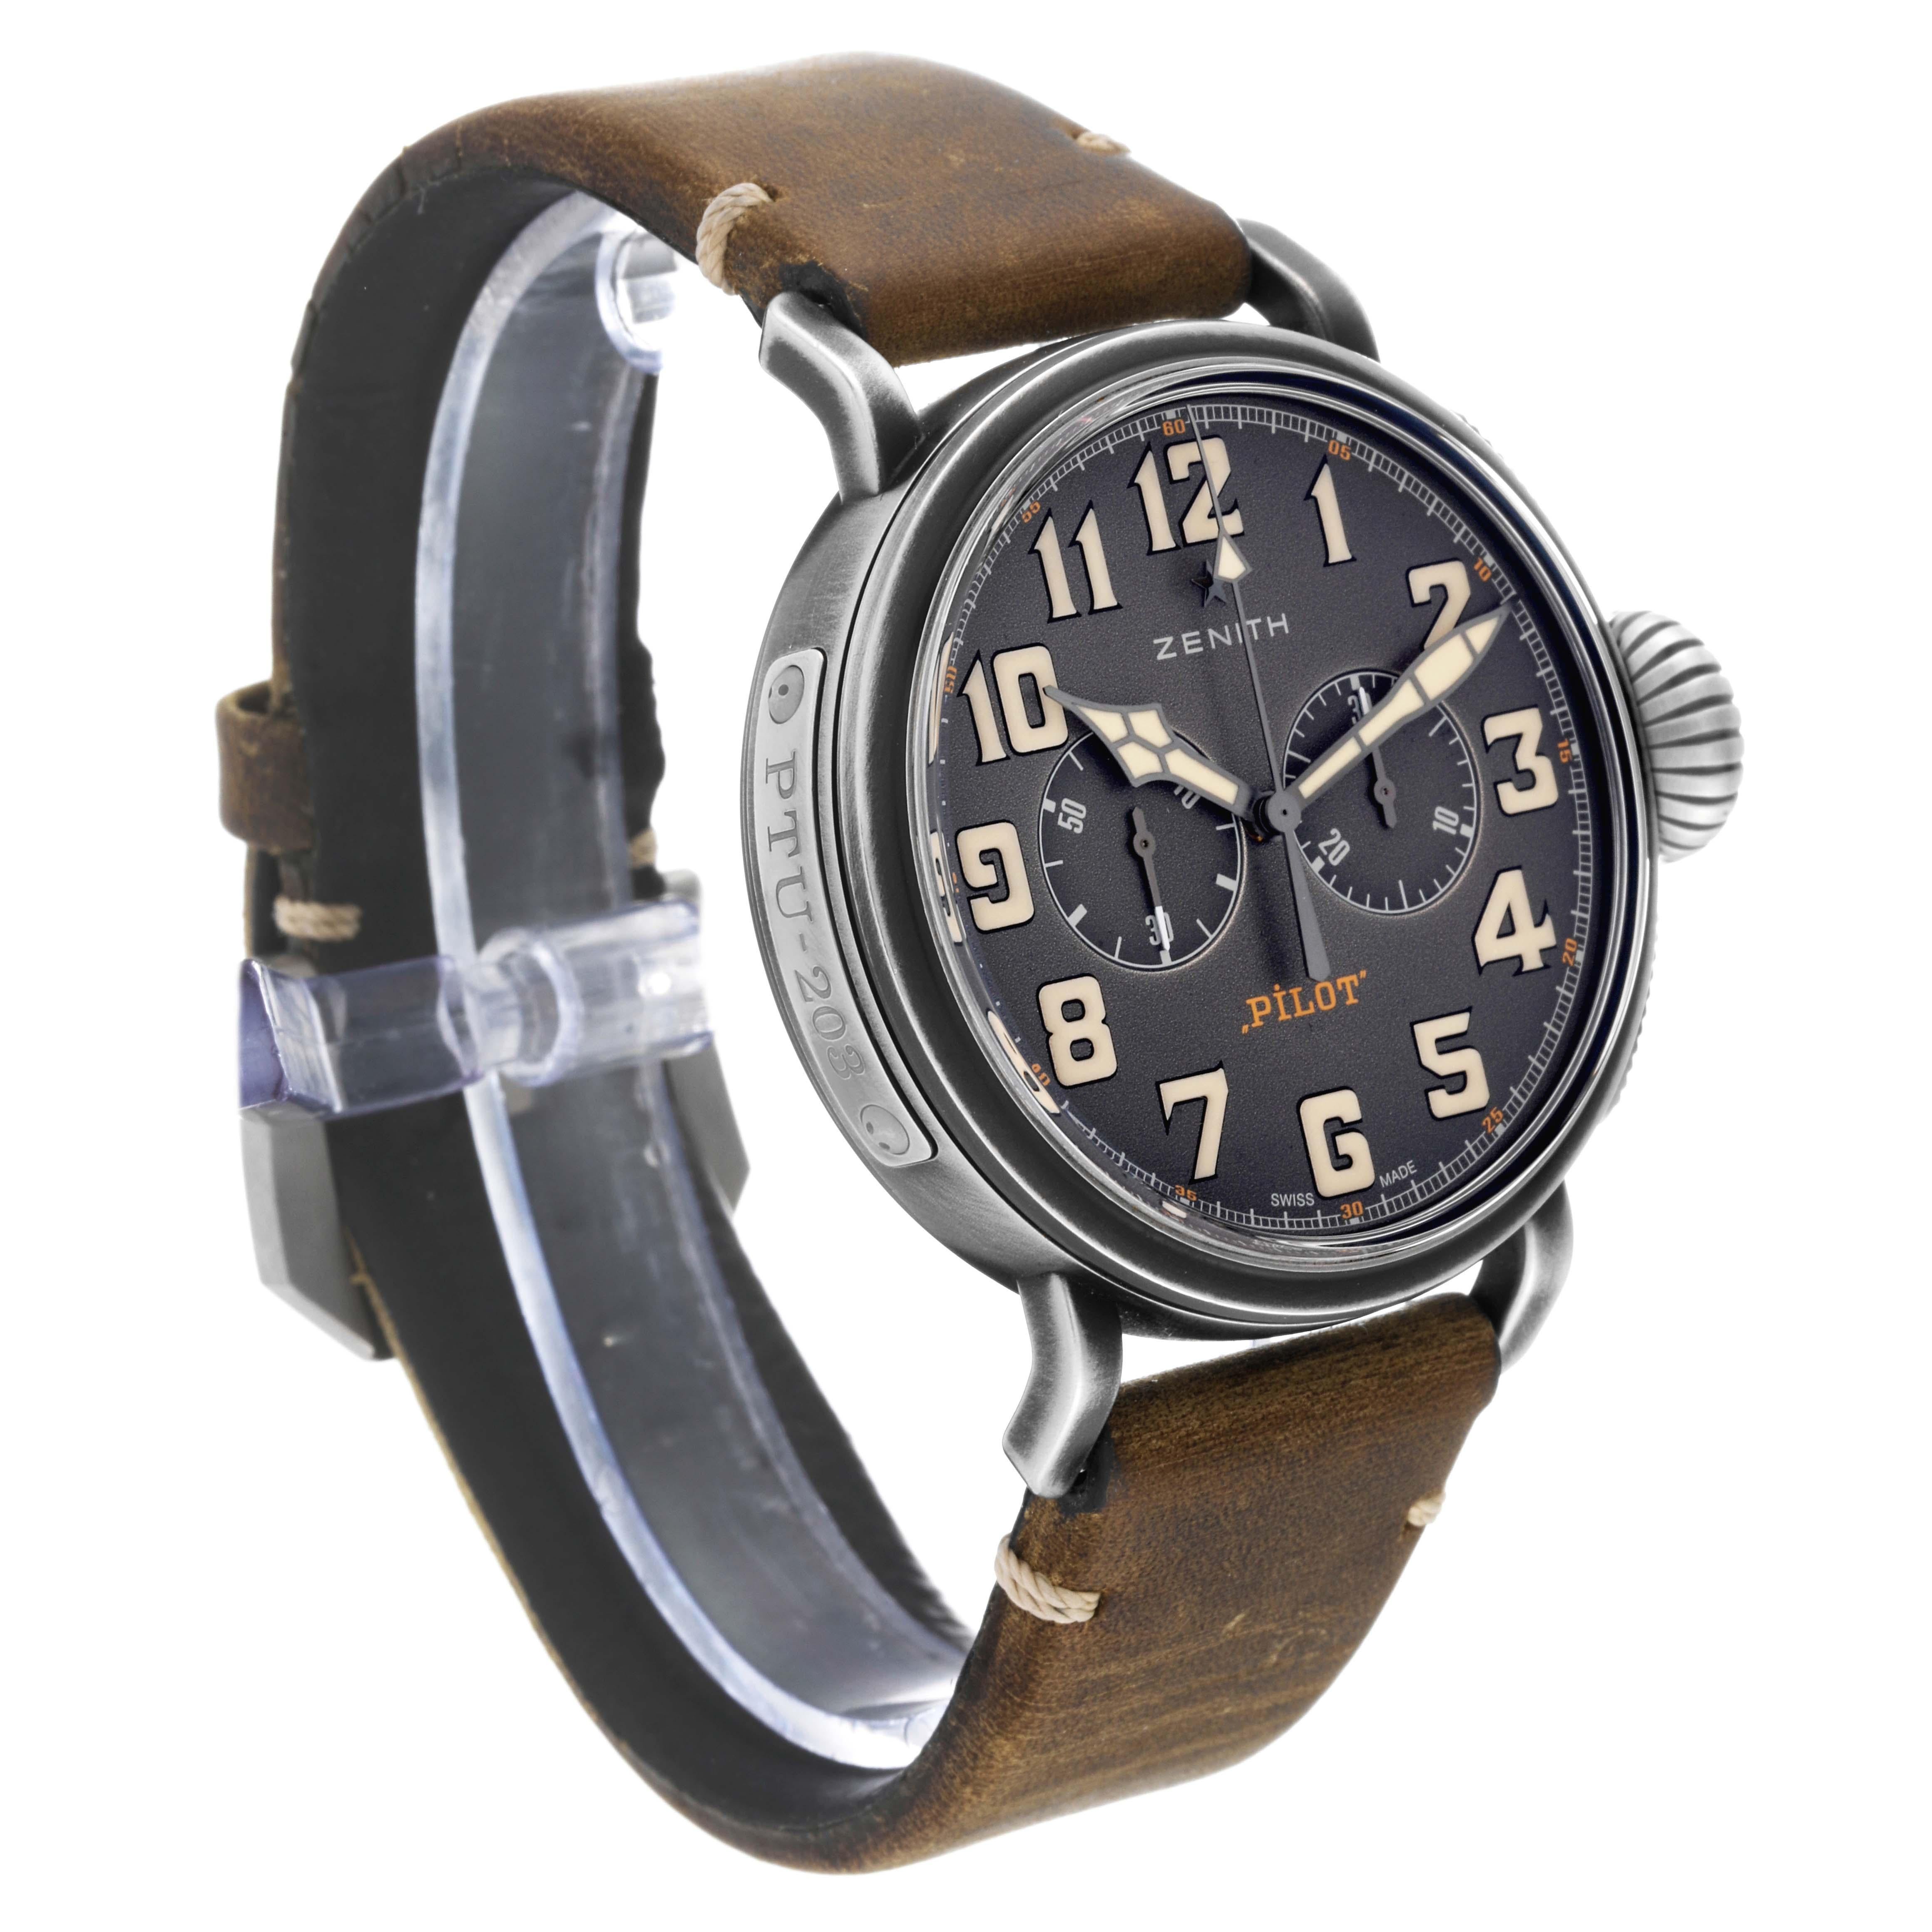 Zenith Heritage Pilot Type 20 Chronograph Steel Titanium Mens Watch 11.2430.4069. Zenith El Primero automatic self-winding movement . Stainless steel case 45 mm in diameter. Oversized onion-shaped crown. Titanium caseback with cafe racer engraving.